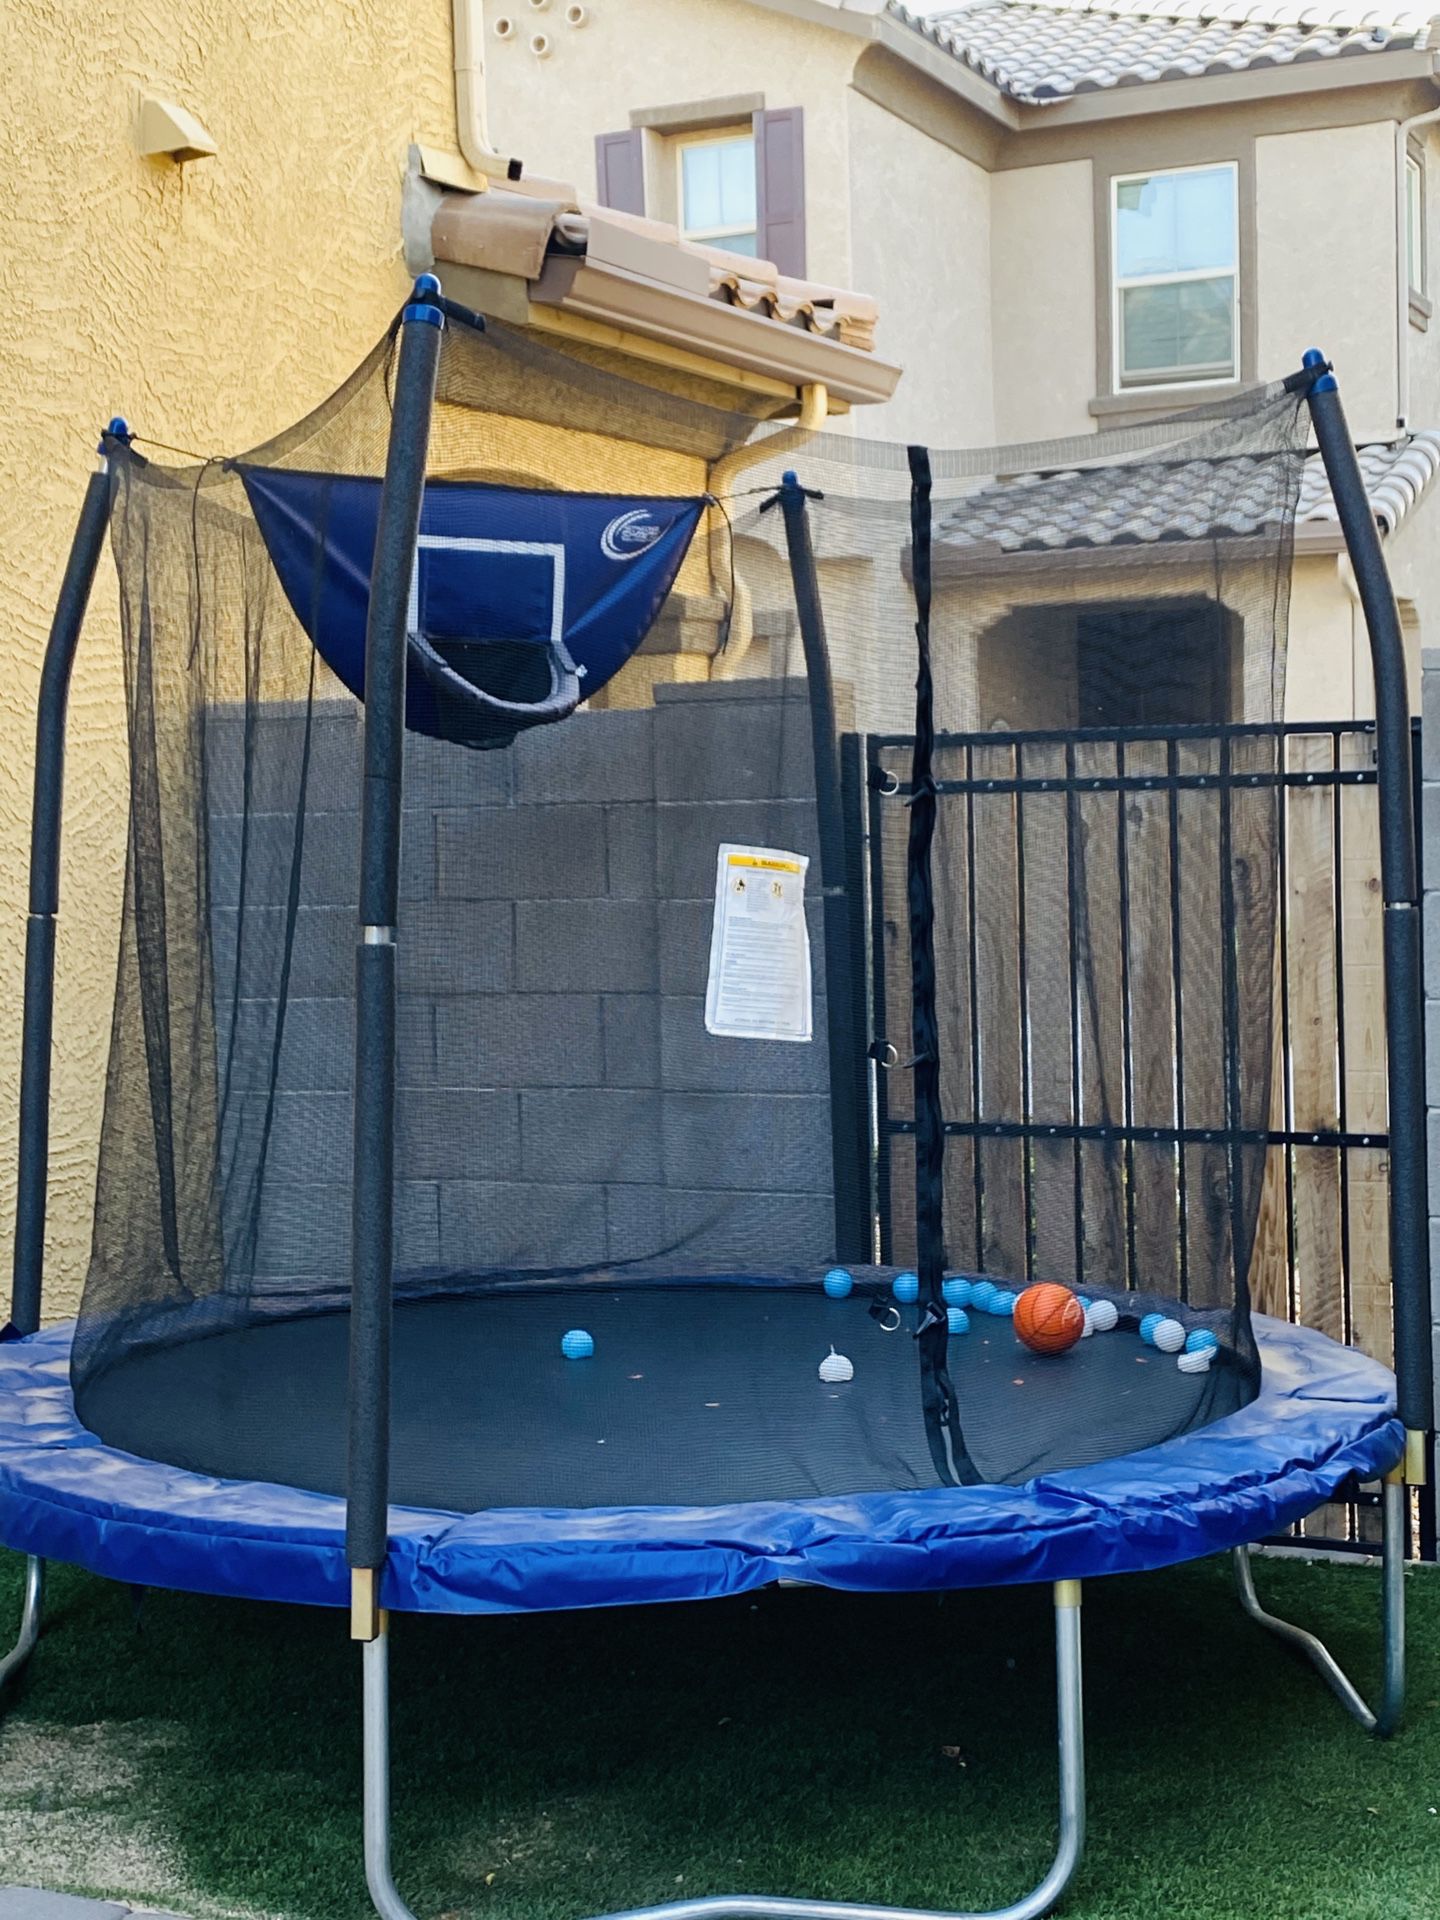 8 inch trampoline with basketball hoop and ball